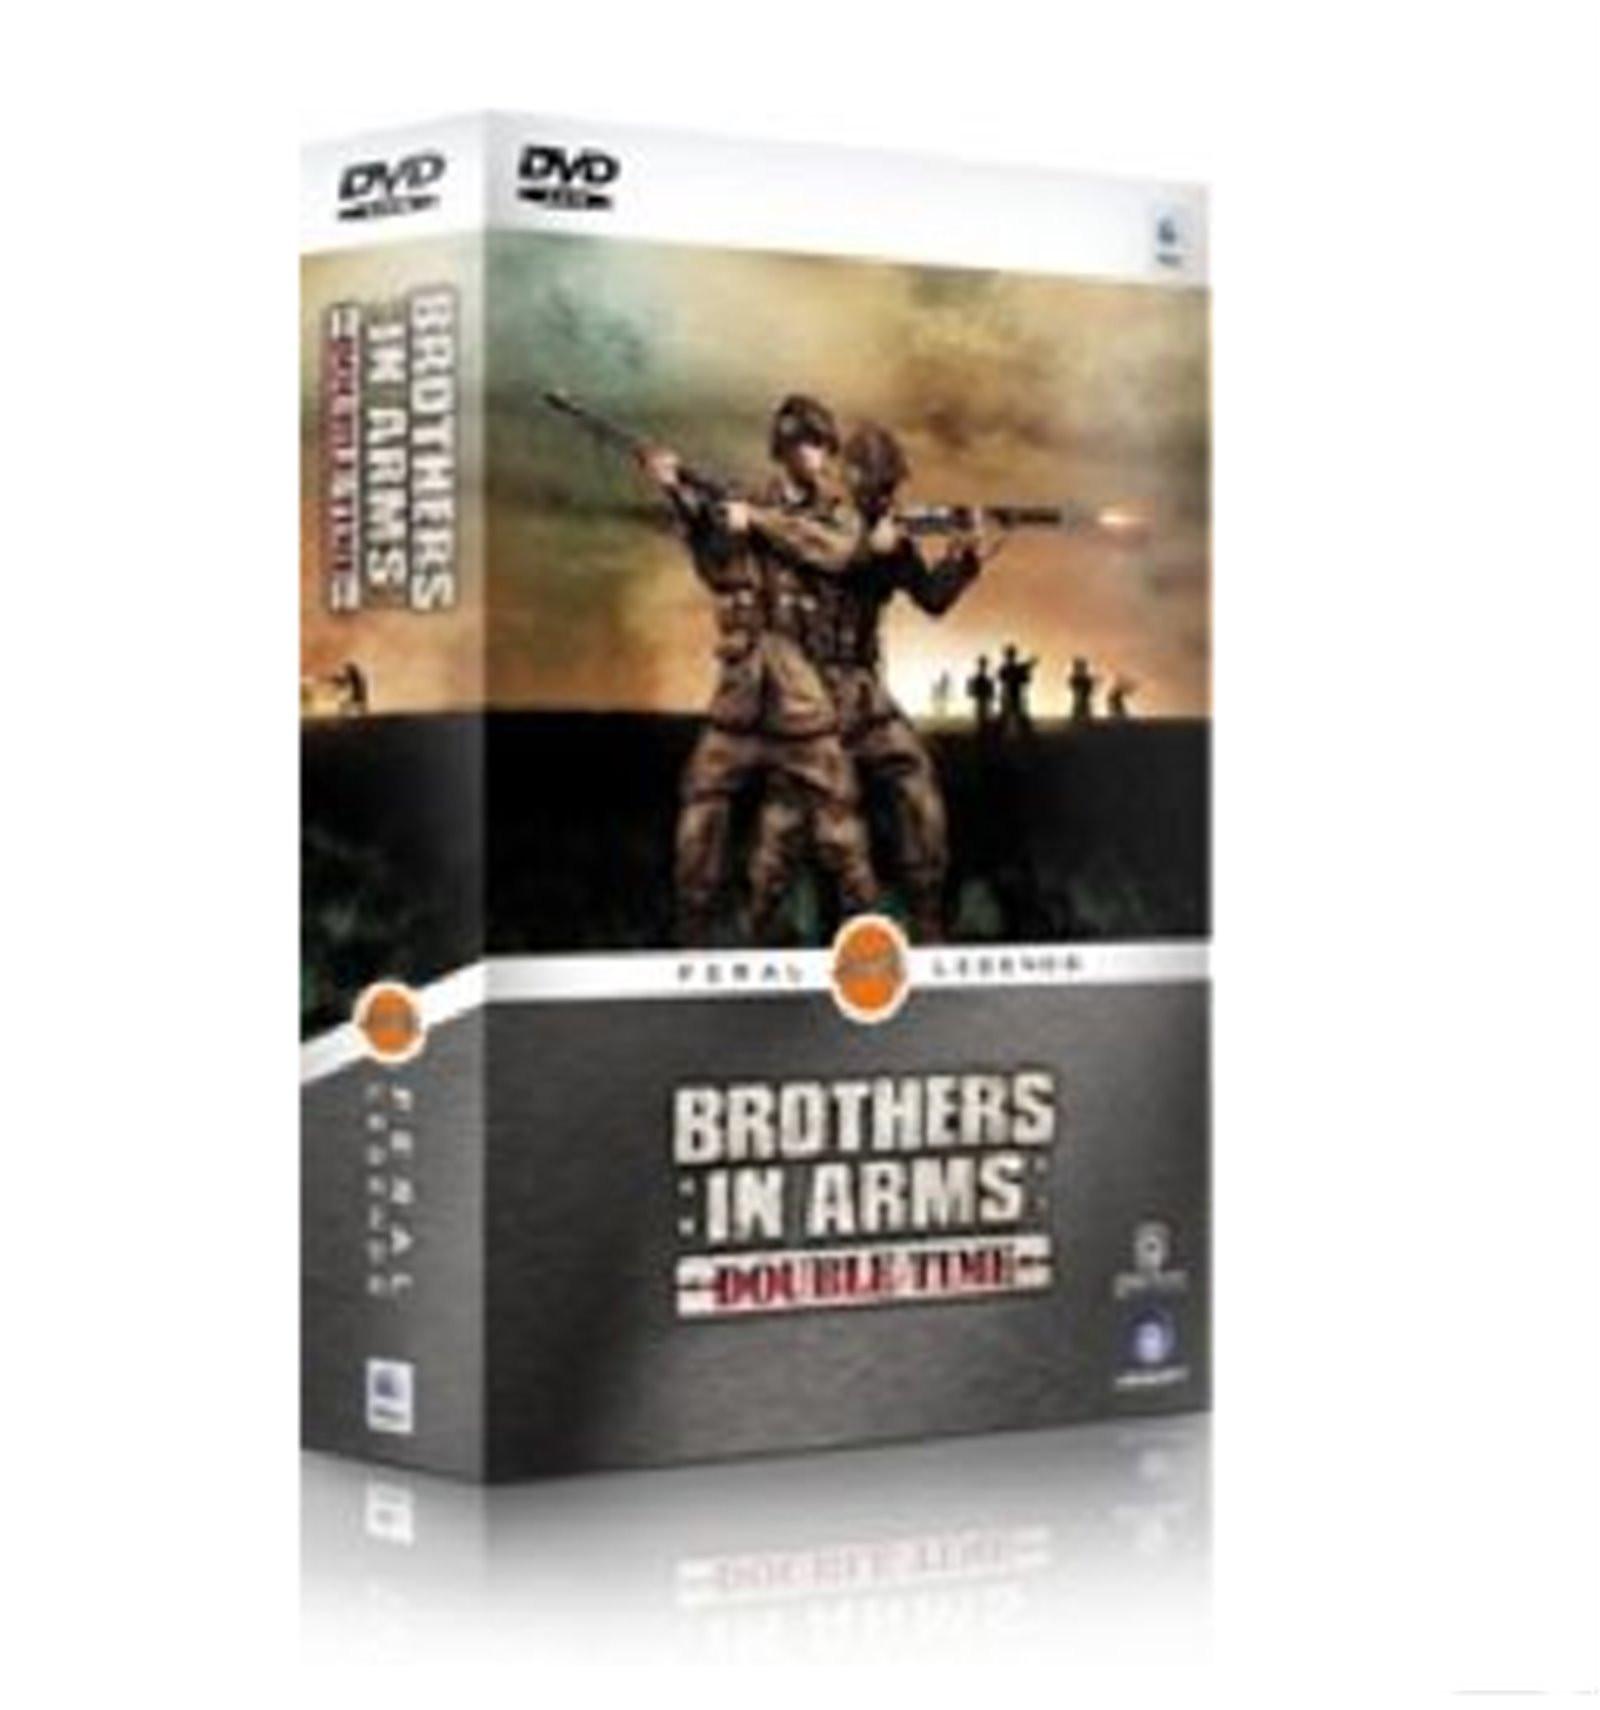 iMac-Games  Brothers in Arms: Double Time Francese MAC 